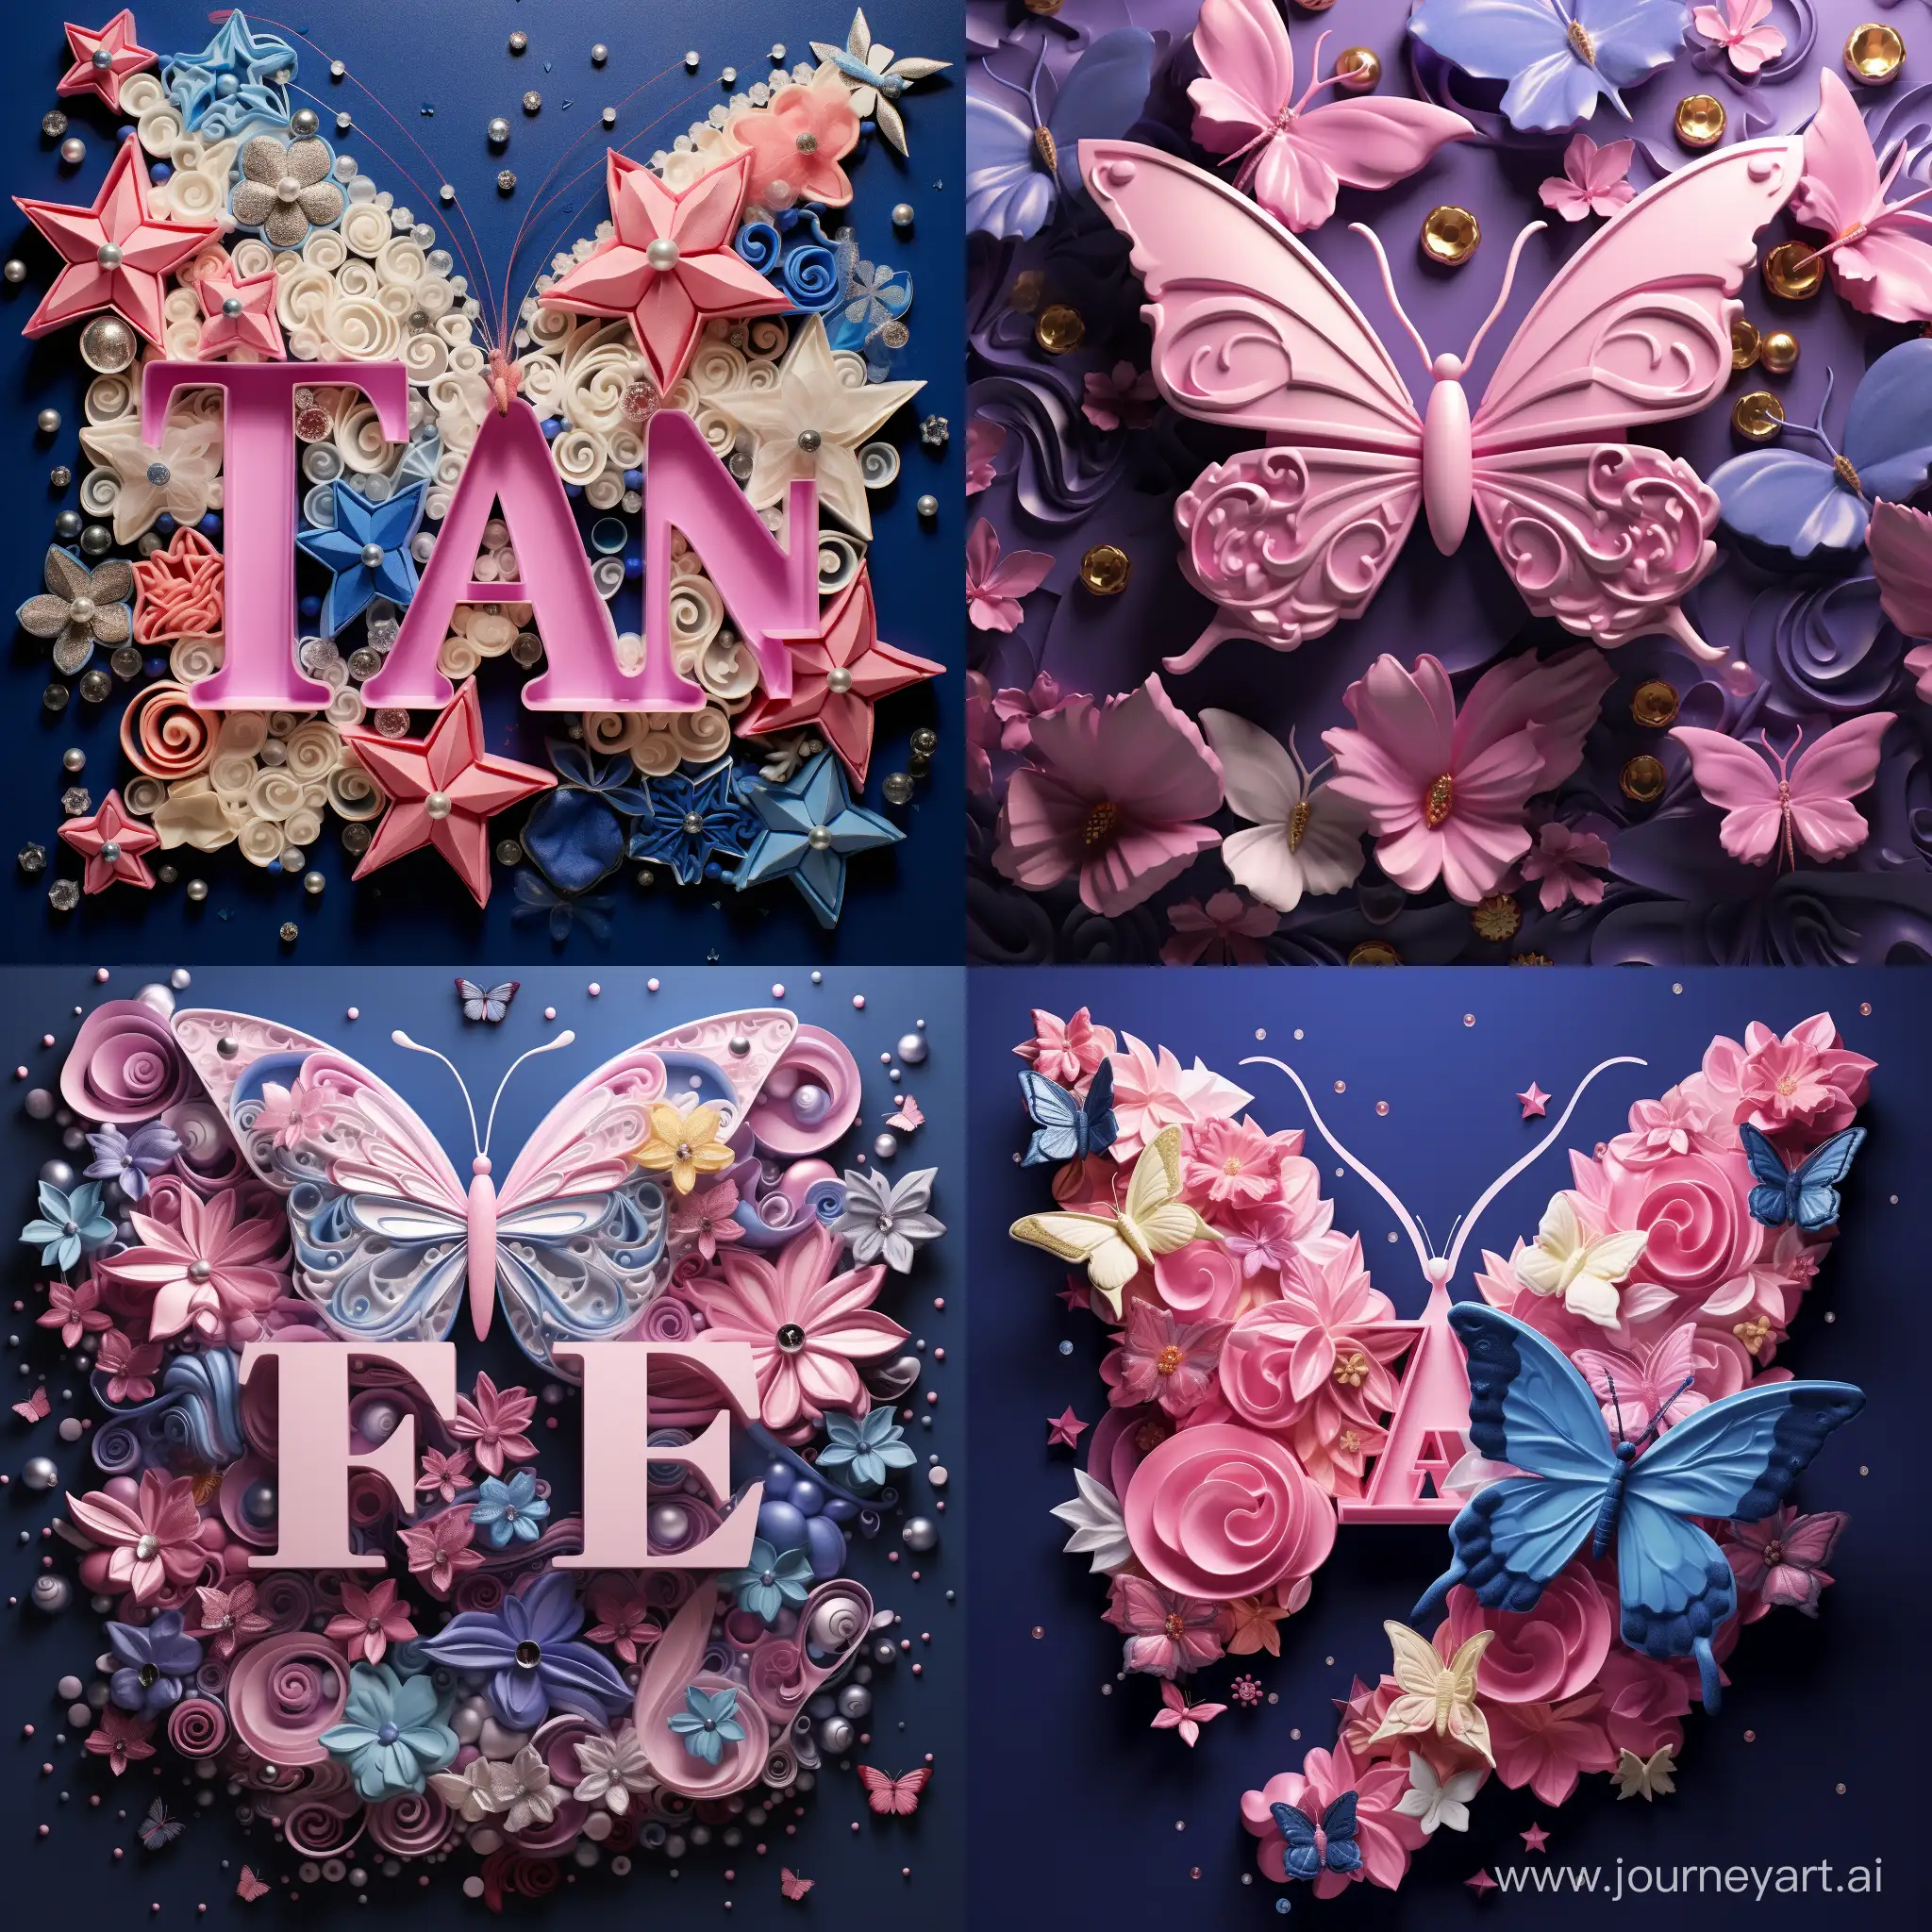 The name "Faten" on stones decorated with pink, blue, and fuchsia, and a mesh, and around it are butterflies, pearls, and stars, 3D animation. 